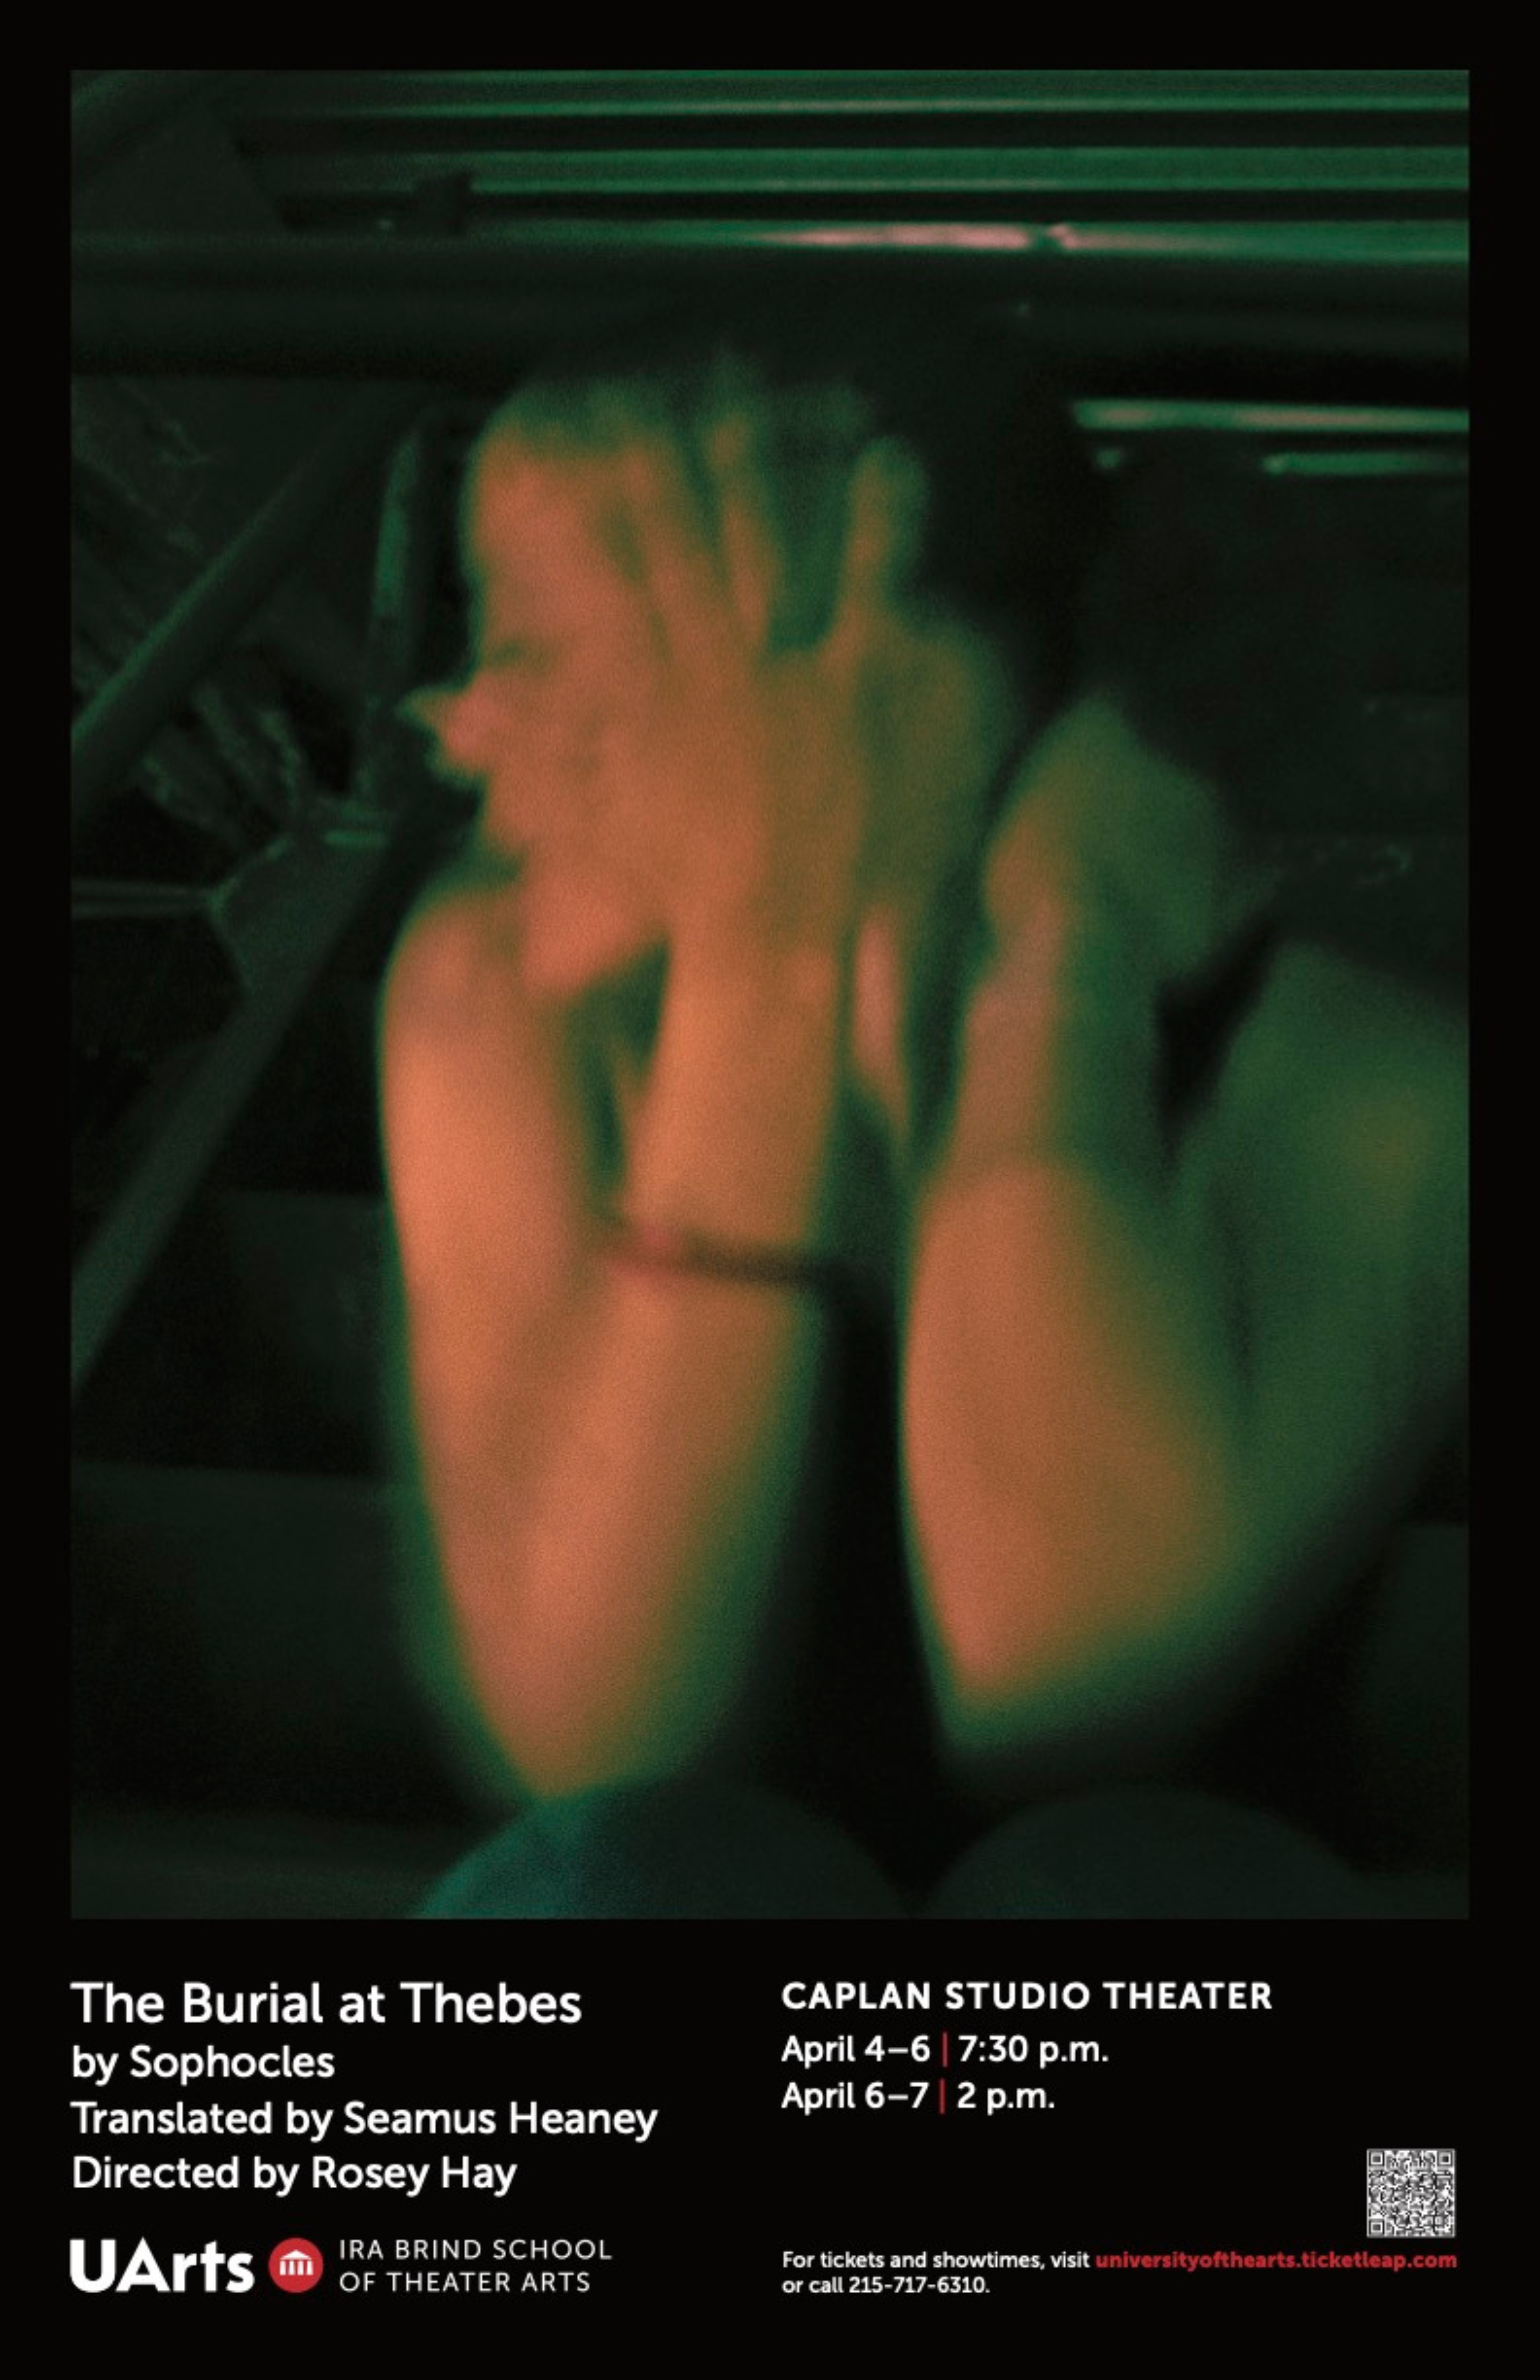 A photograph of a person with their hand in front of their face, and their head turned. The image is blurred as if there is movement, with green shadows throuhgout. Surrounding the person are stairs and metal. The bottom reads “The Burial at Thebes by Sophocles Translated by Seamus Heaney Directed by Rosey Hay” followed by “Caplan Studio Theater April 4–6 at 7:30 p.m. and April 6–7 at 2 p.m.” For tickets and showtimes, visit universityofthearts.ticketleap.com or call 215-717-6310. 